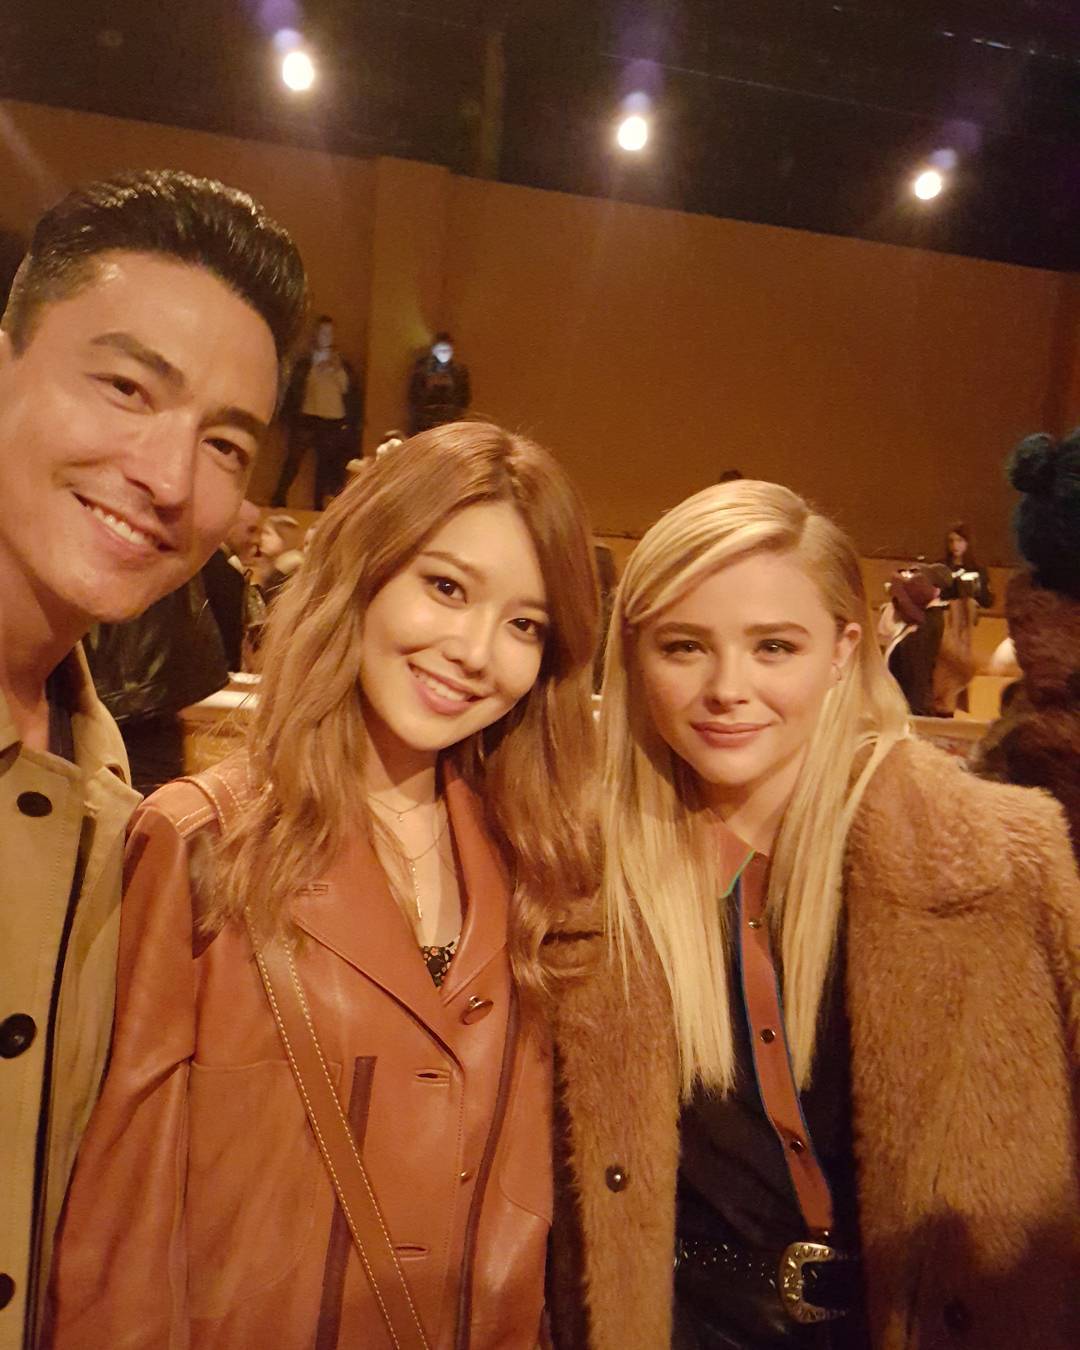 Chloe Grace Moretz's sanity has now been lost to K-pop, help Eric Nam save  her – Asian Junkie